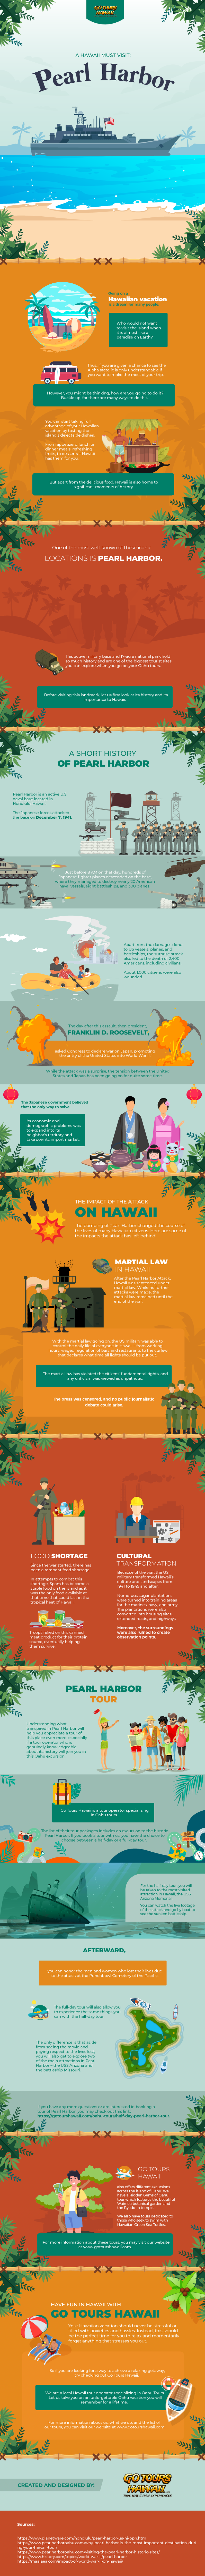 Hawaii-Tourist-Spot-Welcome-to-Pearl-Harbor-infographic-image-GTH232